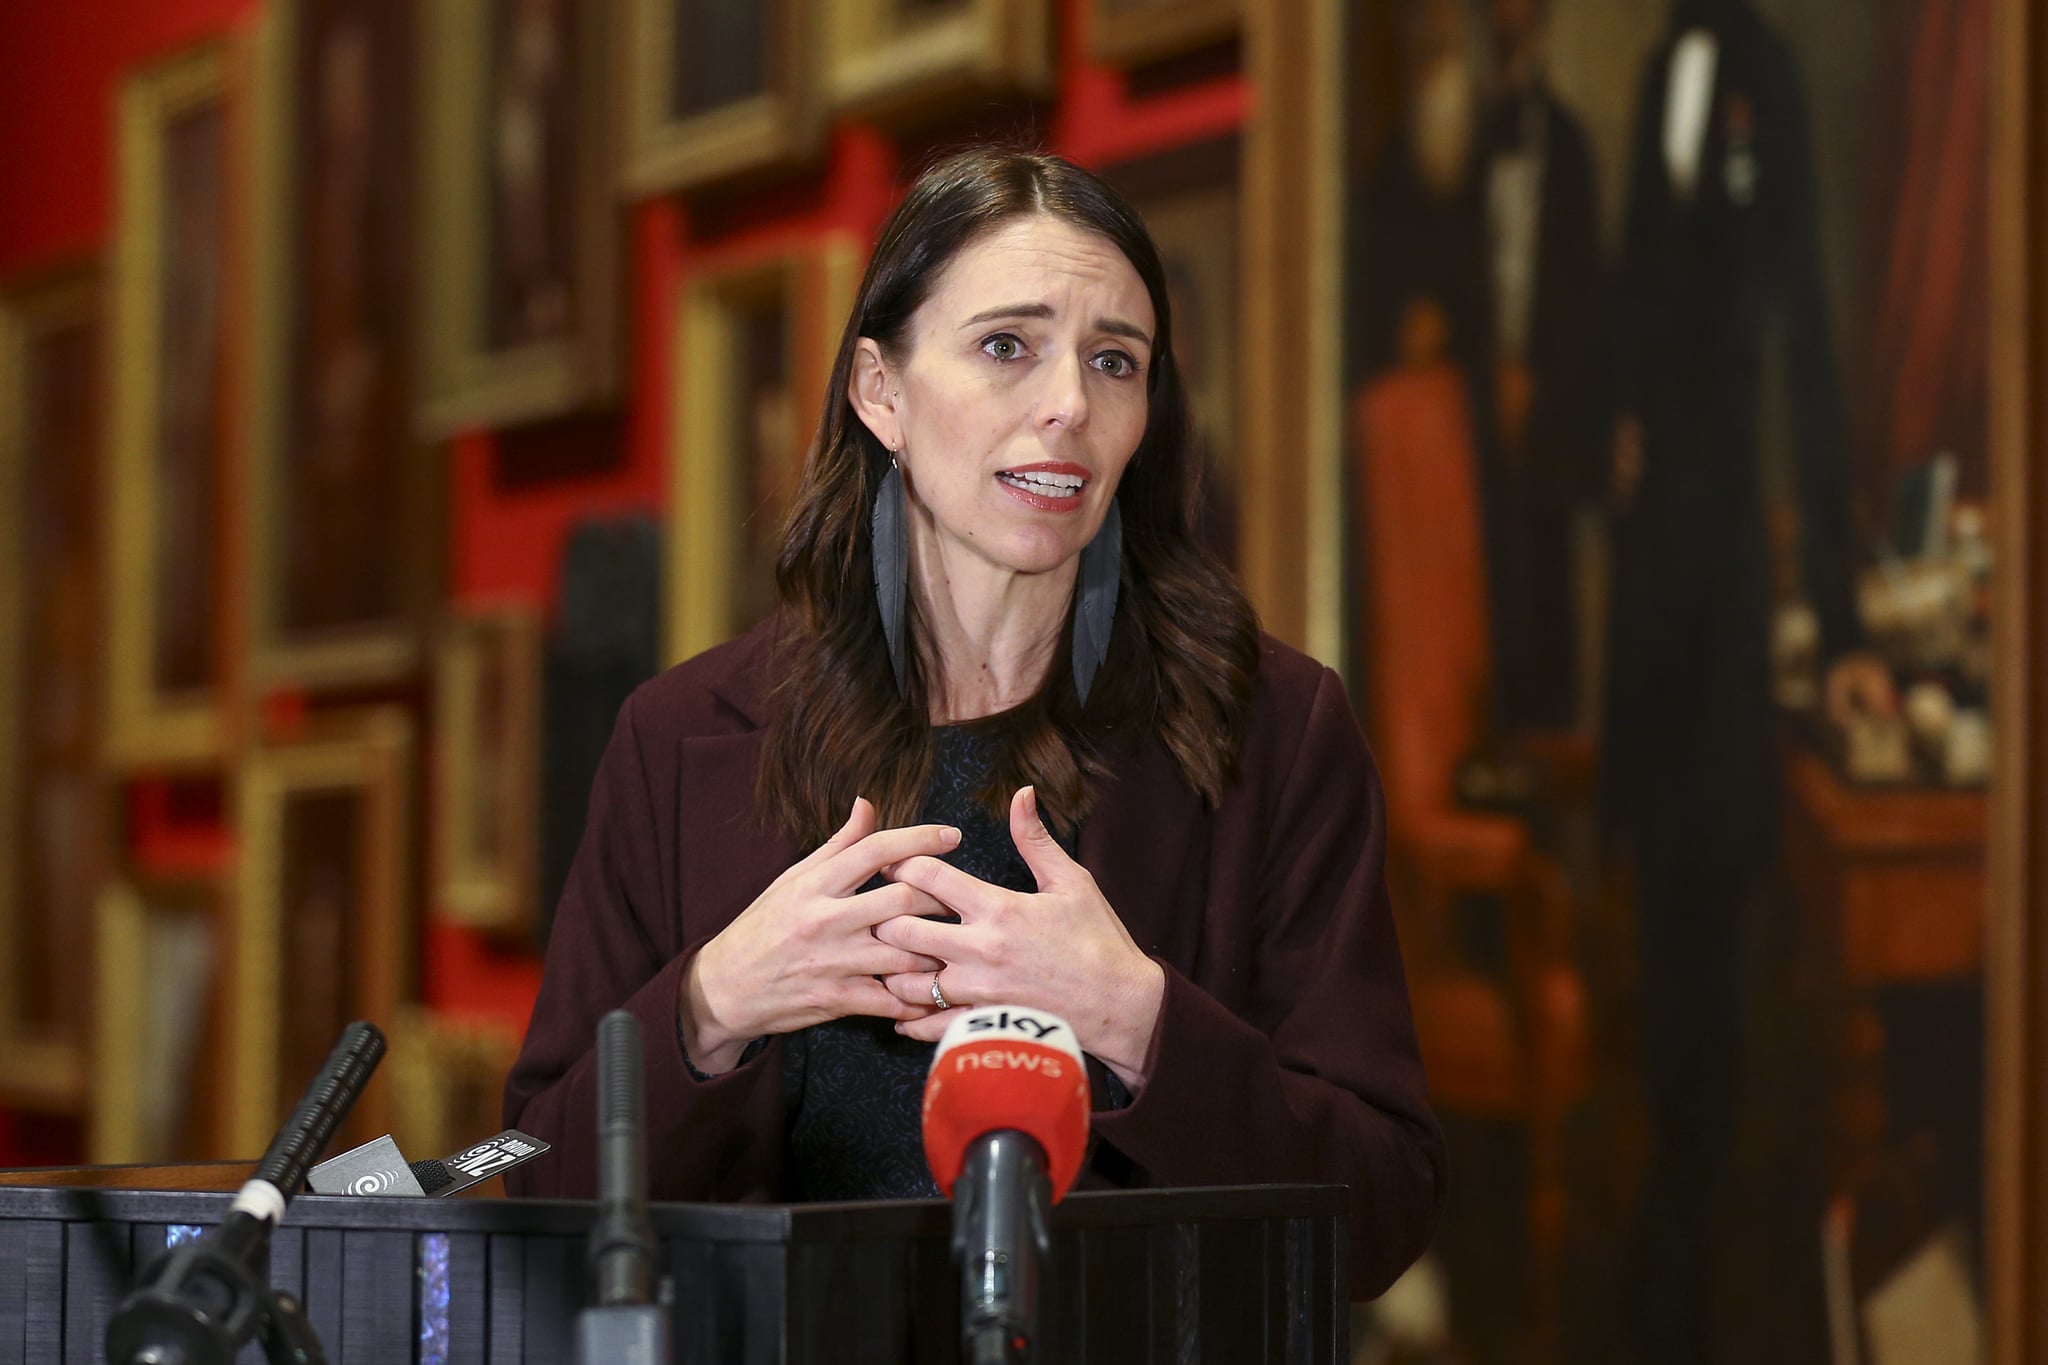 WELLINGTON, NEW ZEALAND - MAY 28: Prime Minister Jacinda Ardern speaks to media during a press conference at the Museum of New Zealand, Te Papa, on May 28, 2020 in Wellington, New Zealand. Prime Minister Jacinda Ardern announced a $95 million recovery package for New Zealand's museums and cultural trusts due to the impact of the coronavirus related recession. $25m will go to the national arts development agency, Creative New Zealand and $18m will go to Te Papa to continue operating. Heritage New Zealand will receive $11.3m, and the Antarctic Heritage Trust will receive $1.4m. Te Papa Museum was closed on 20 March 2020 in response to the COVID-19 pandemic and subsequent government restrictions imposed to stop the spread of coronavirus in New Zealand. The 68-day closure was the longest in the museum's history.  (Photo by Hagen Hopkins/Getty Images)